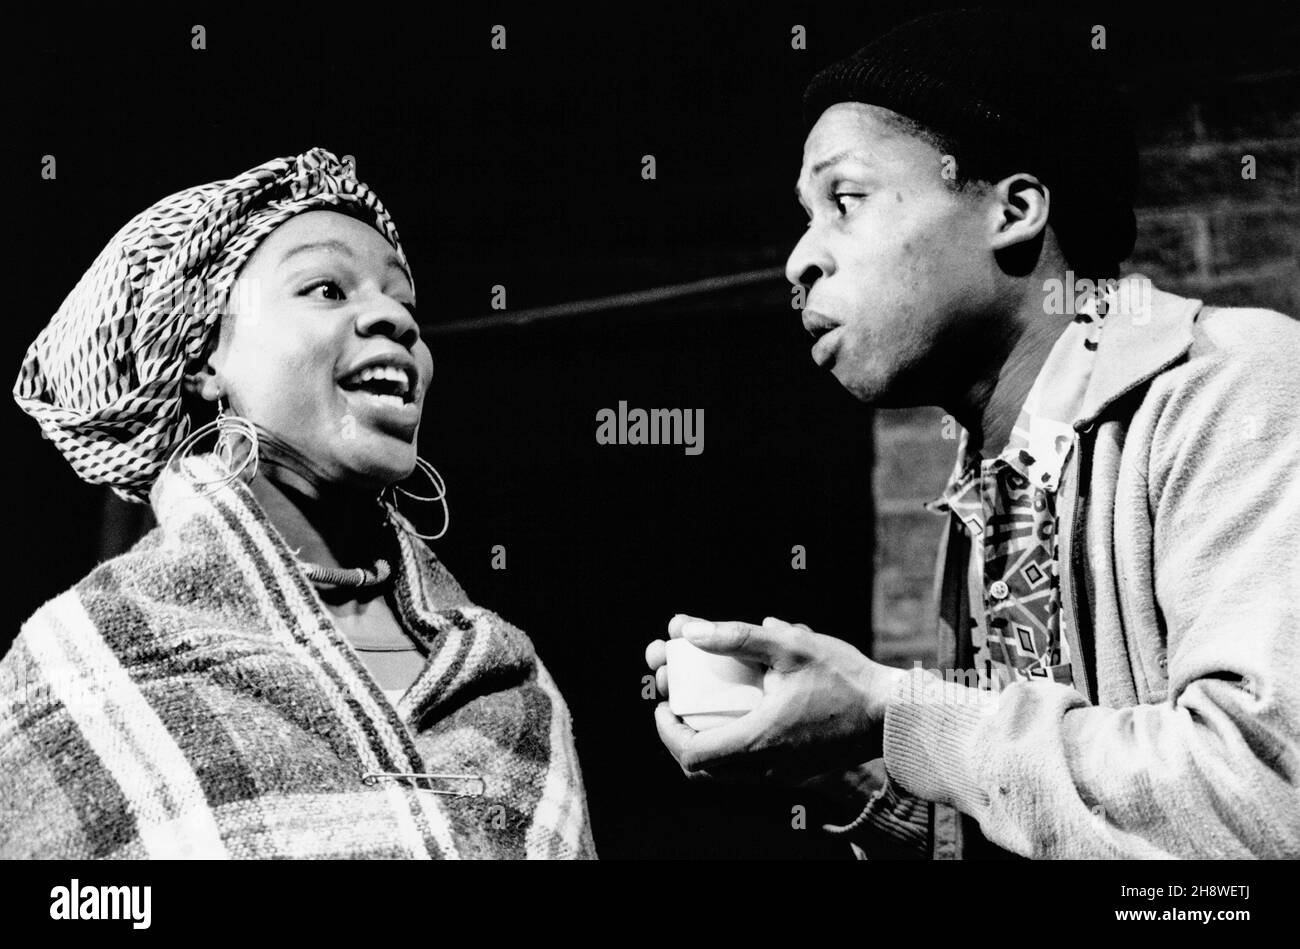 Valerie Hunkins, Jude Akuwudike in FATHERLAND by Murray Watts presented by the Bush Theatre at Riverside Studios, London W6  20/01/1989  set design: Michael Taylor  costumes: Sue Born Thompson  lighting: Rick Fisher  director: Brian Stirner Stock Photo